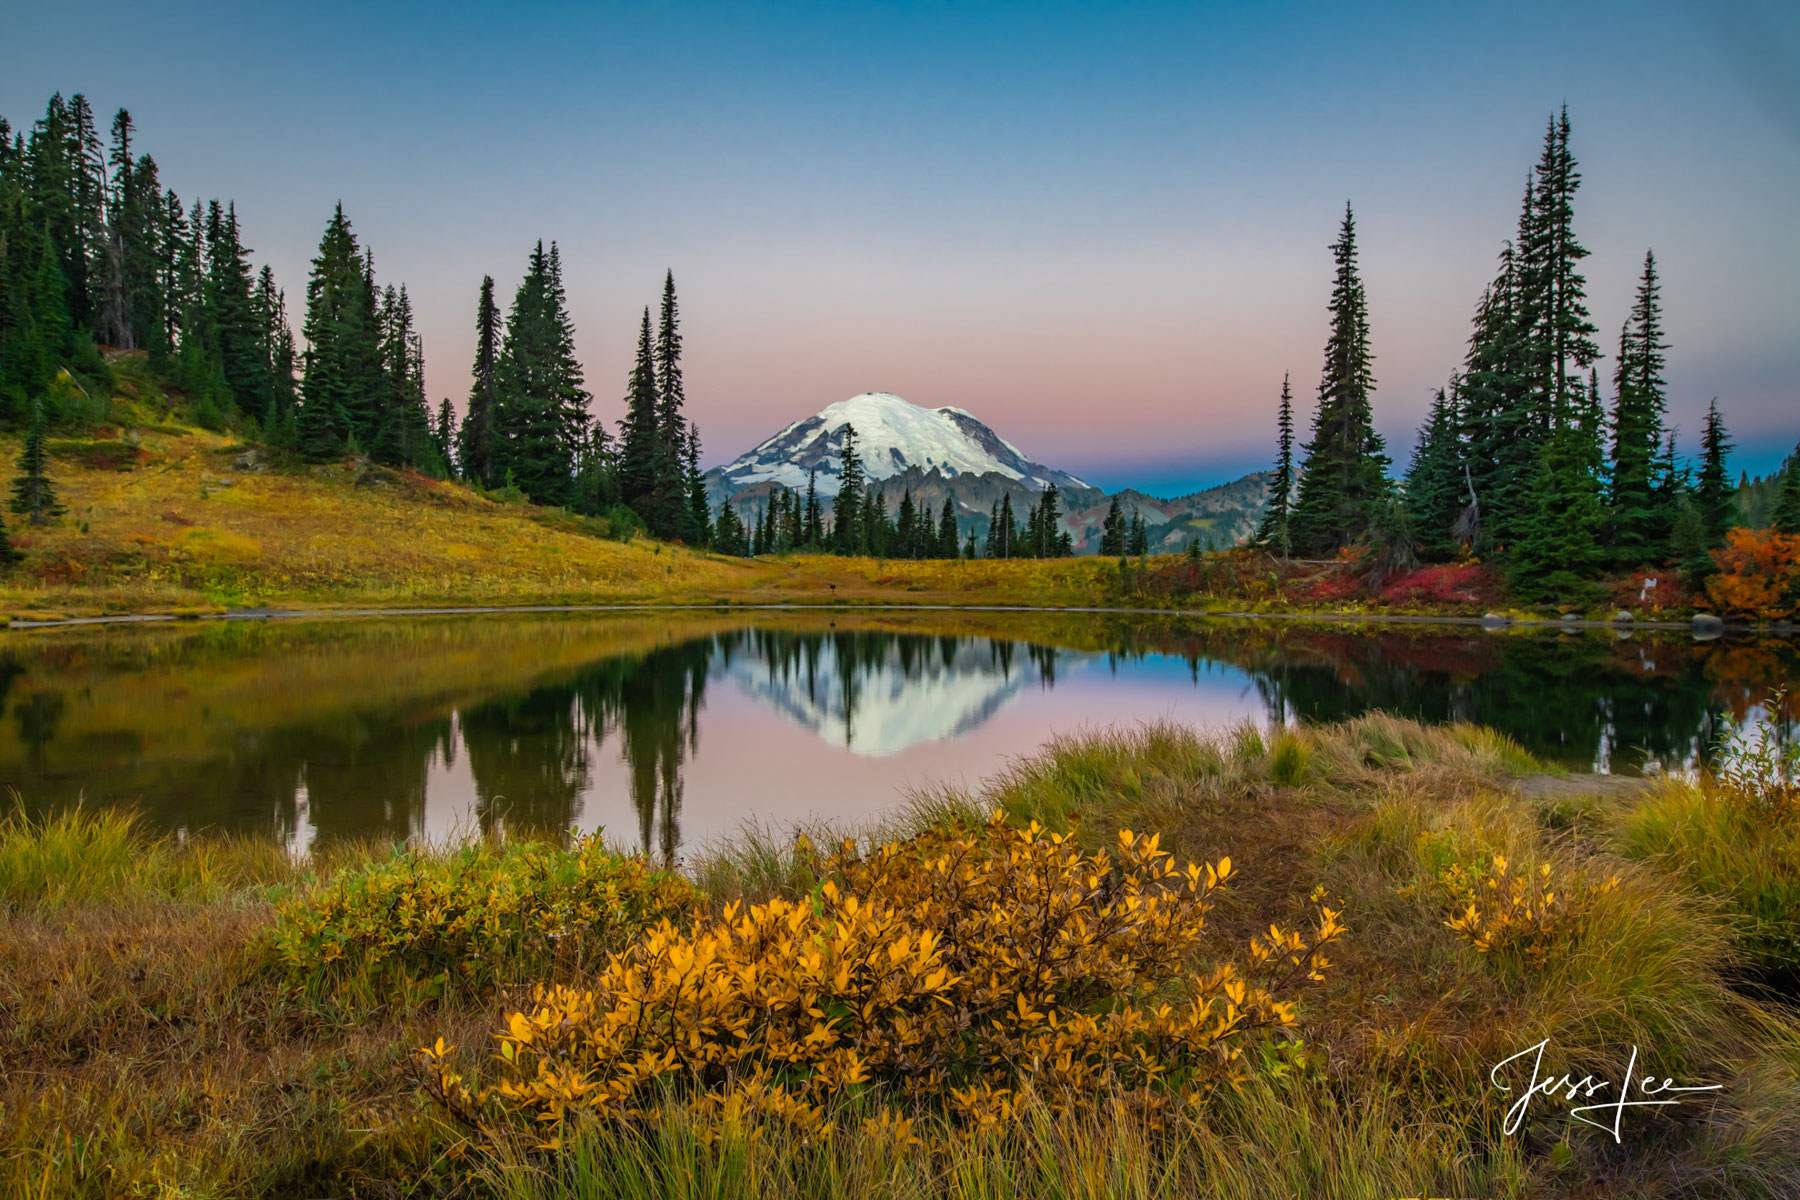 Tipso lake with fall color, and mount rainier reflecting in the lake with a beautiful sky. Fine art wall art photography print.